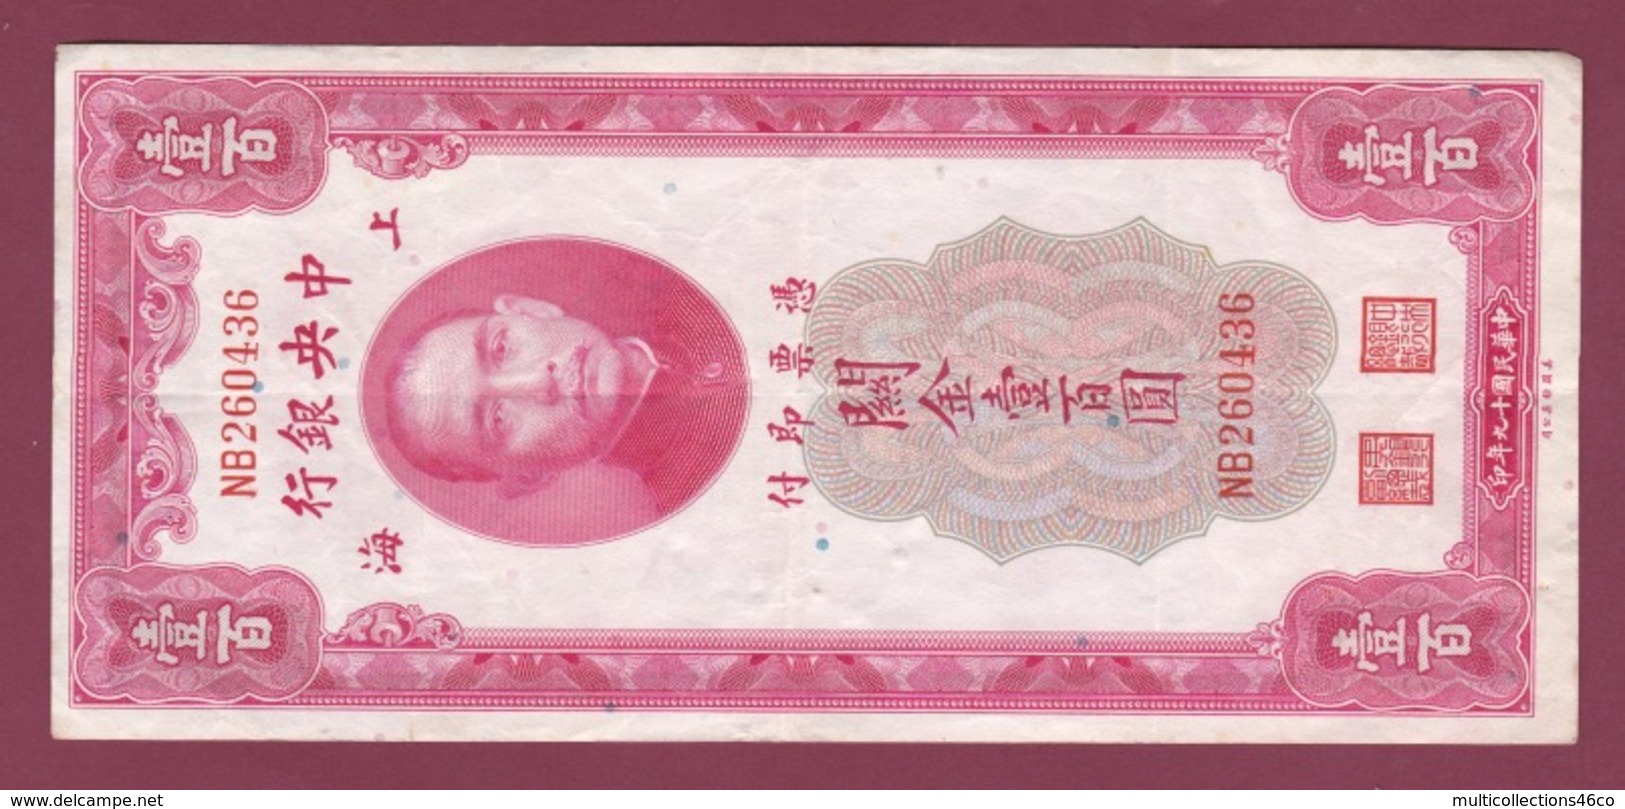 100619A - BILLET ASIE CHINE The Central Bank Of China 100 Shanghai 1930 One Hundred Customs Gold Units NB260436 - Chine